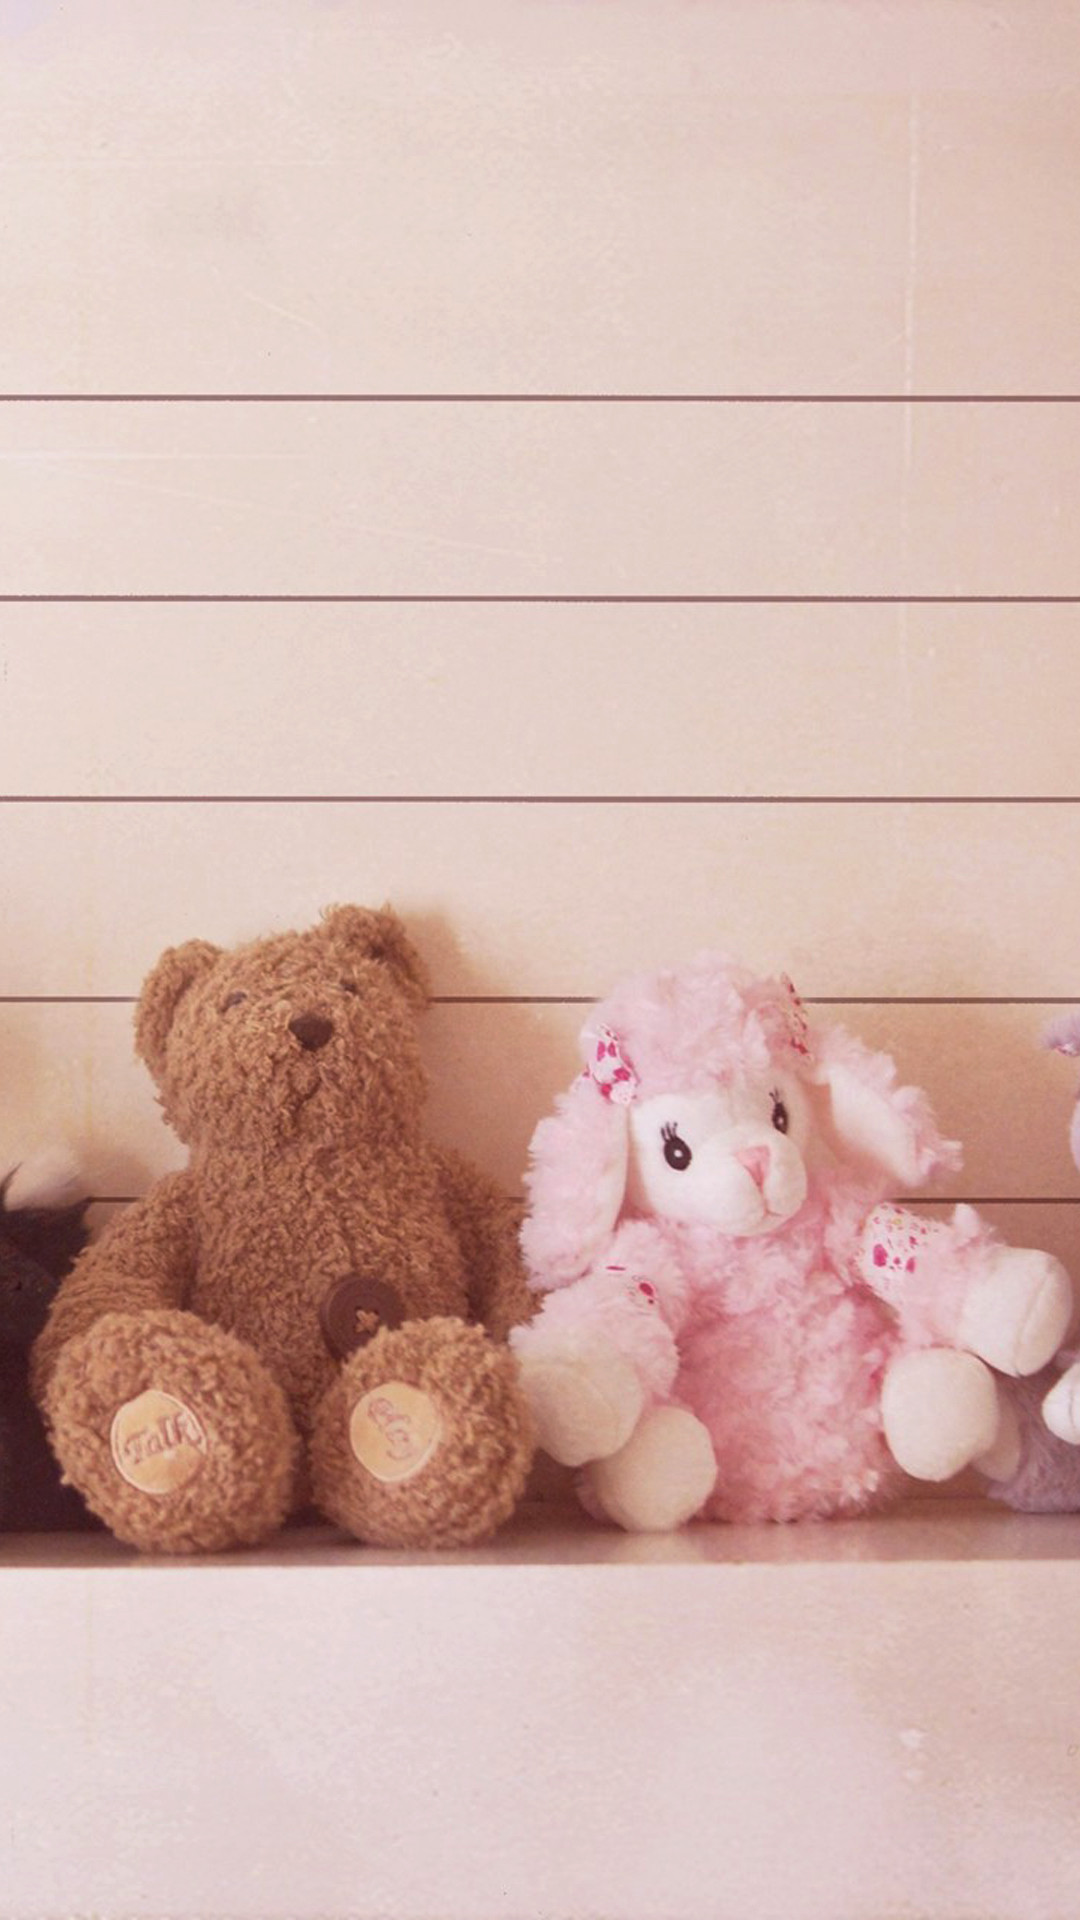 Cute Teddy Bear Couple Iphone Android Mobile Wallpaper Http Wallfest Com 1080x1920